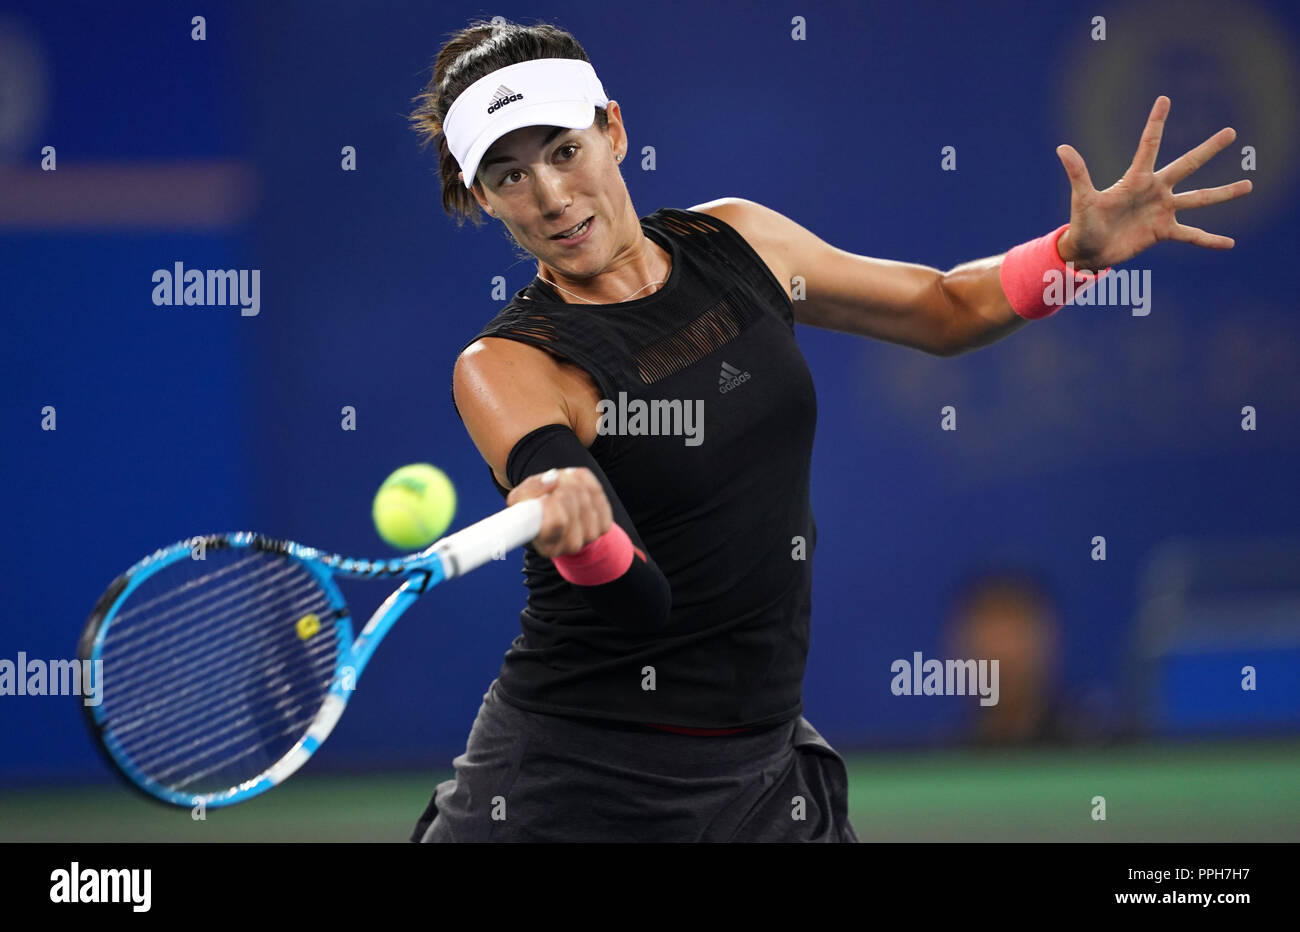 Wuhan, China's Hubei Province. 26th Sep, 2018. Garnine Muguraza of Spain  returns a shot during singles third round match against Katerina Siniakova  of the Czech Republic at the 2018 WTA Wuhan Open